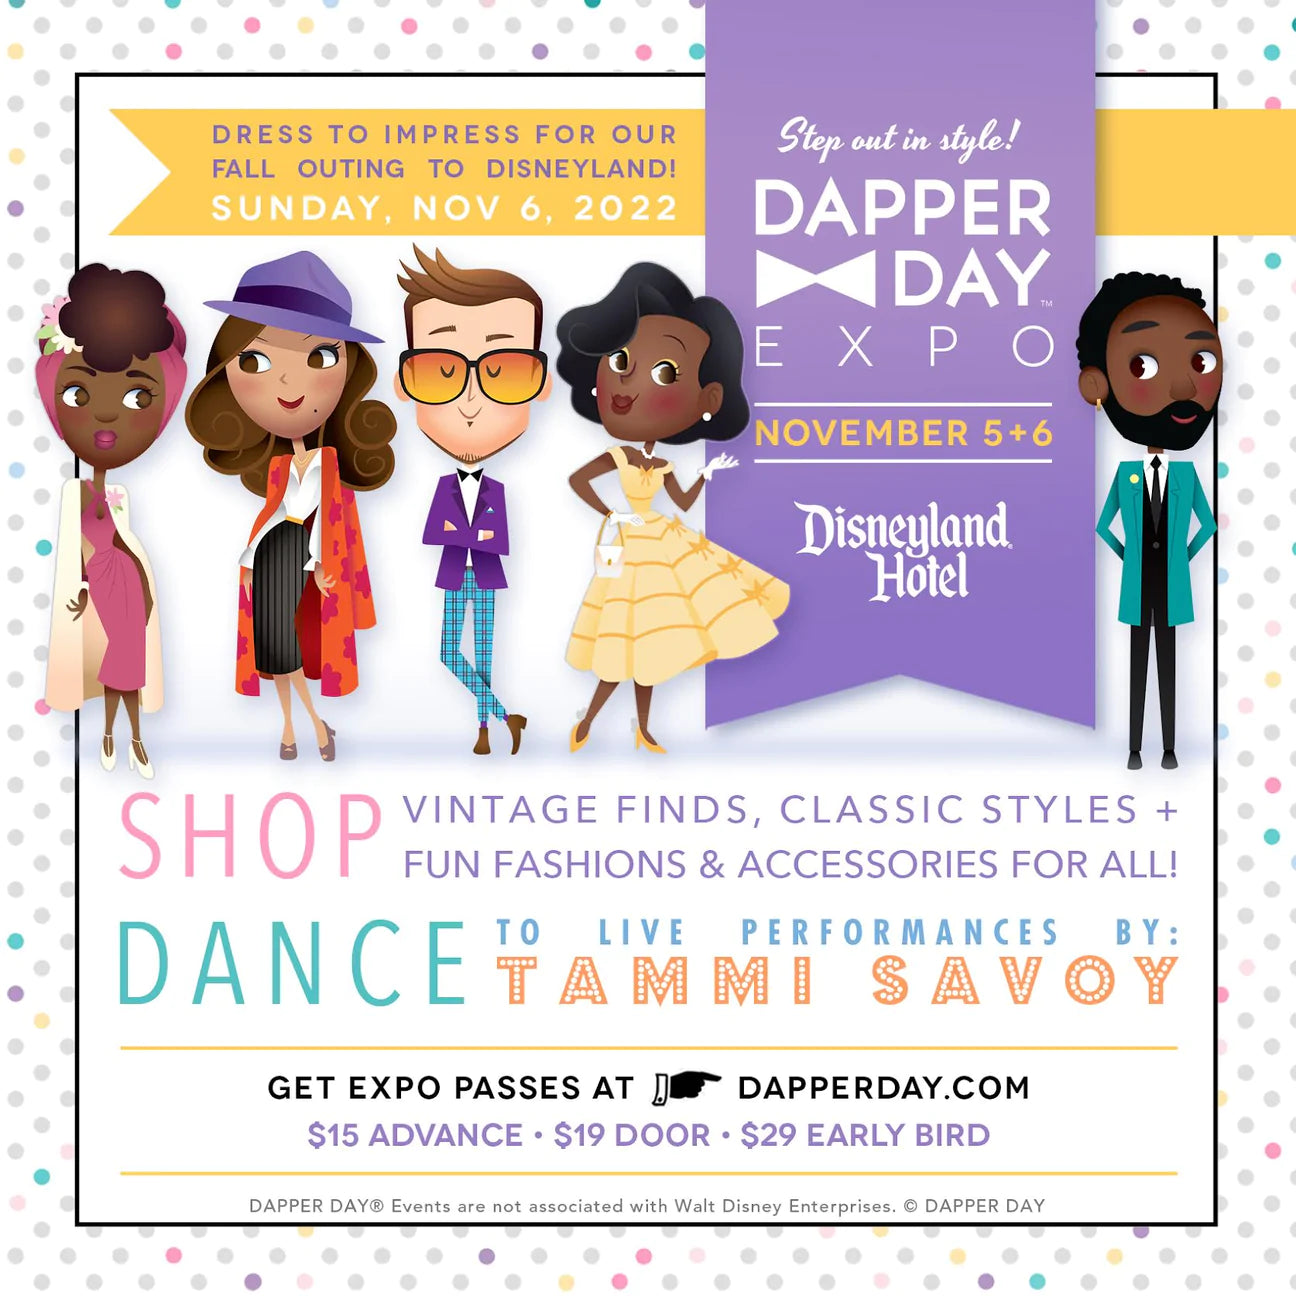 Another FAB Dapper Day Expo at Disneyland coming up! The Feathered Head